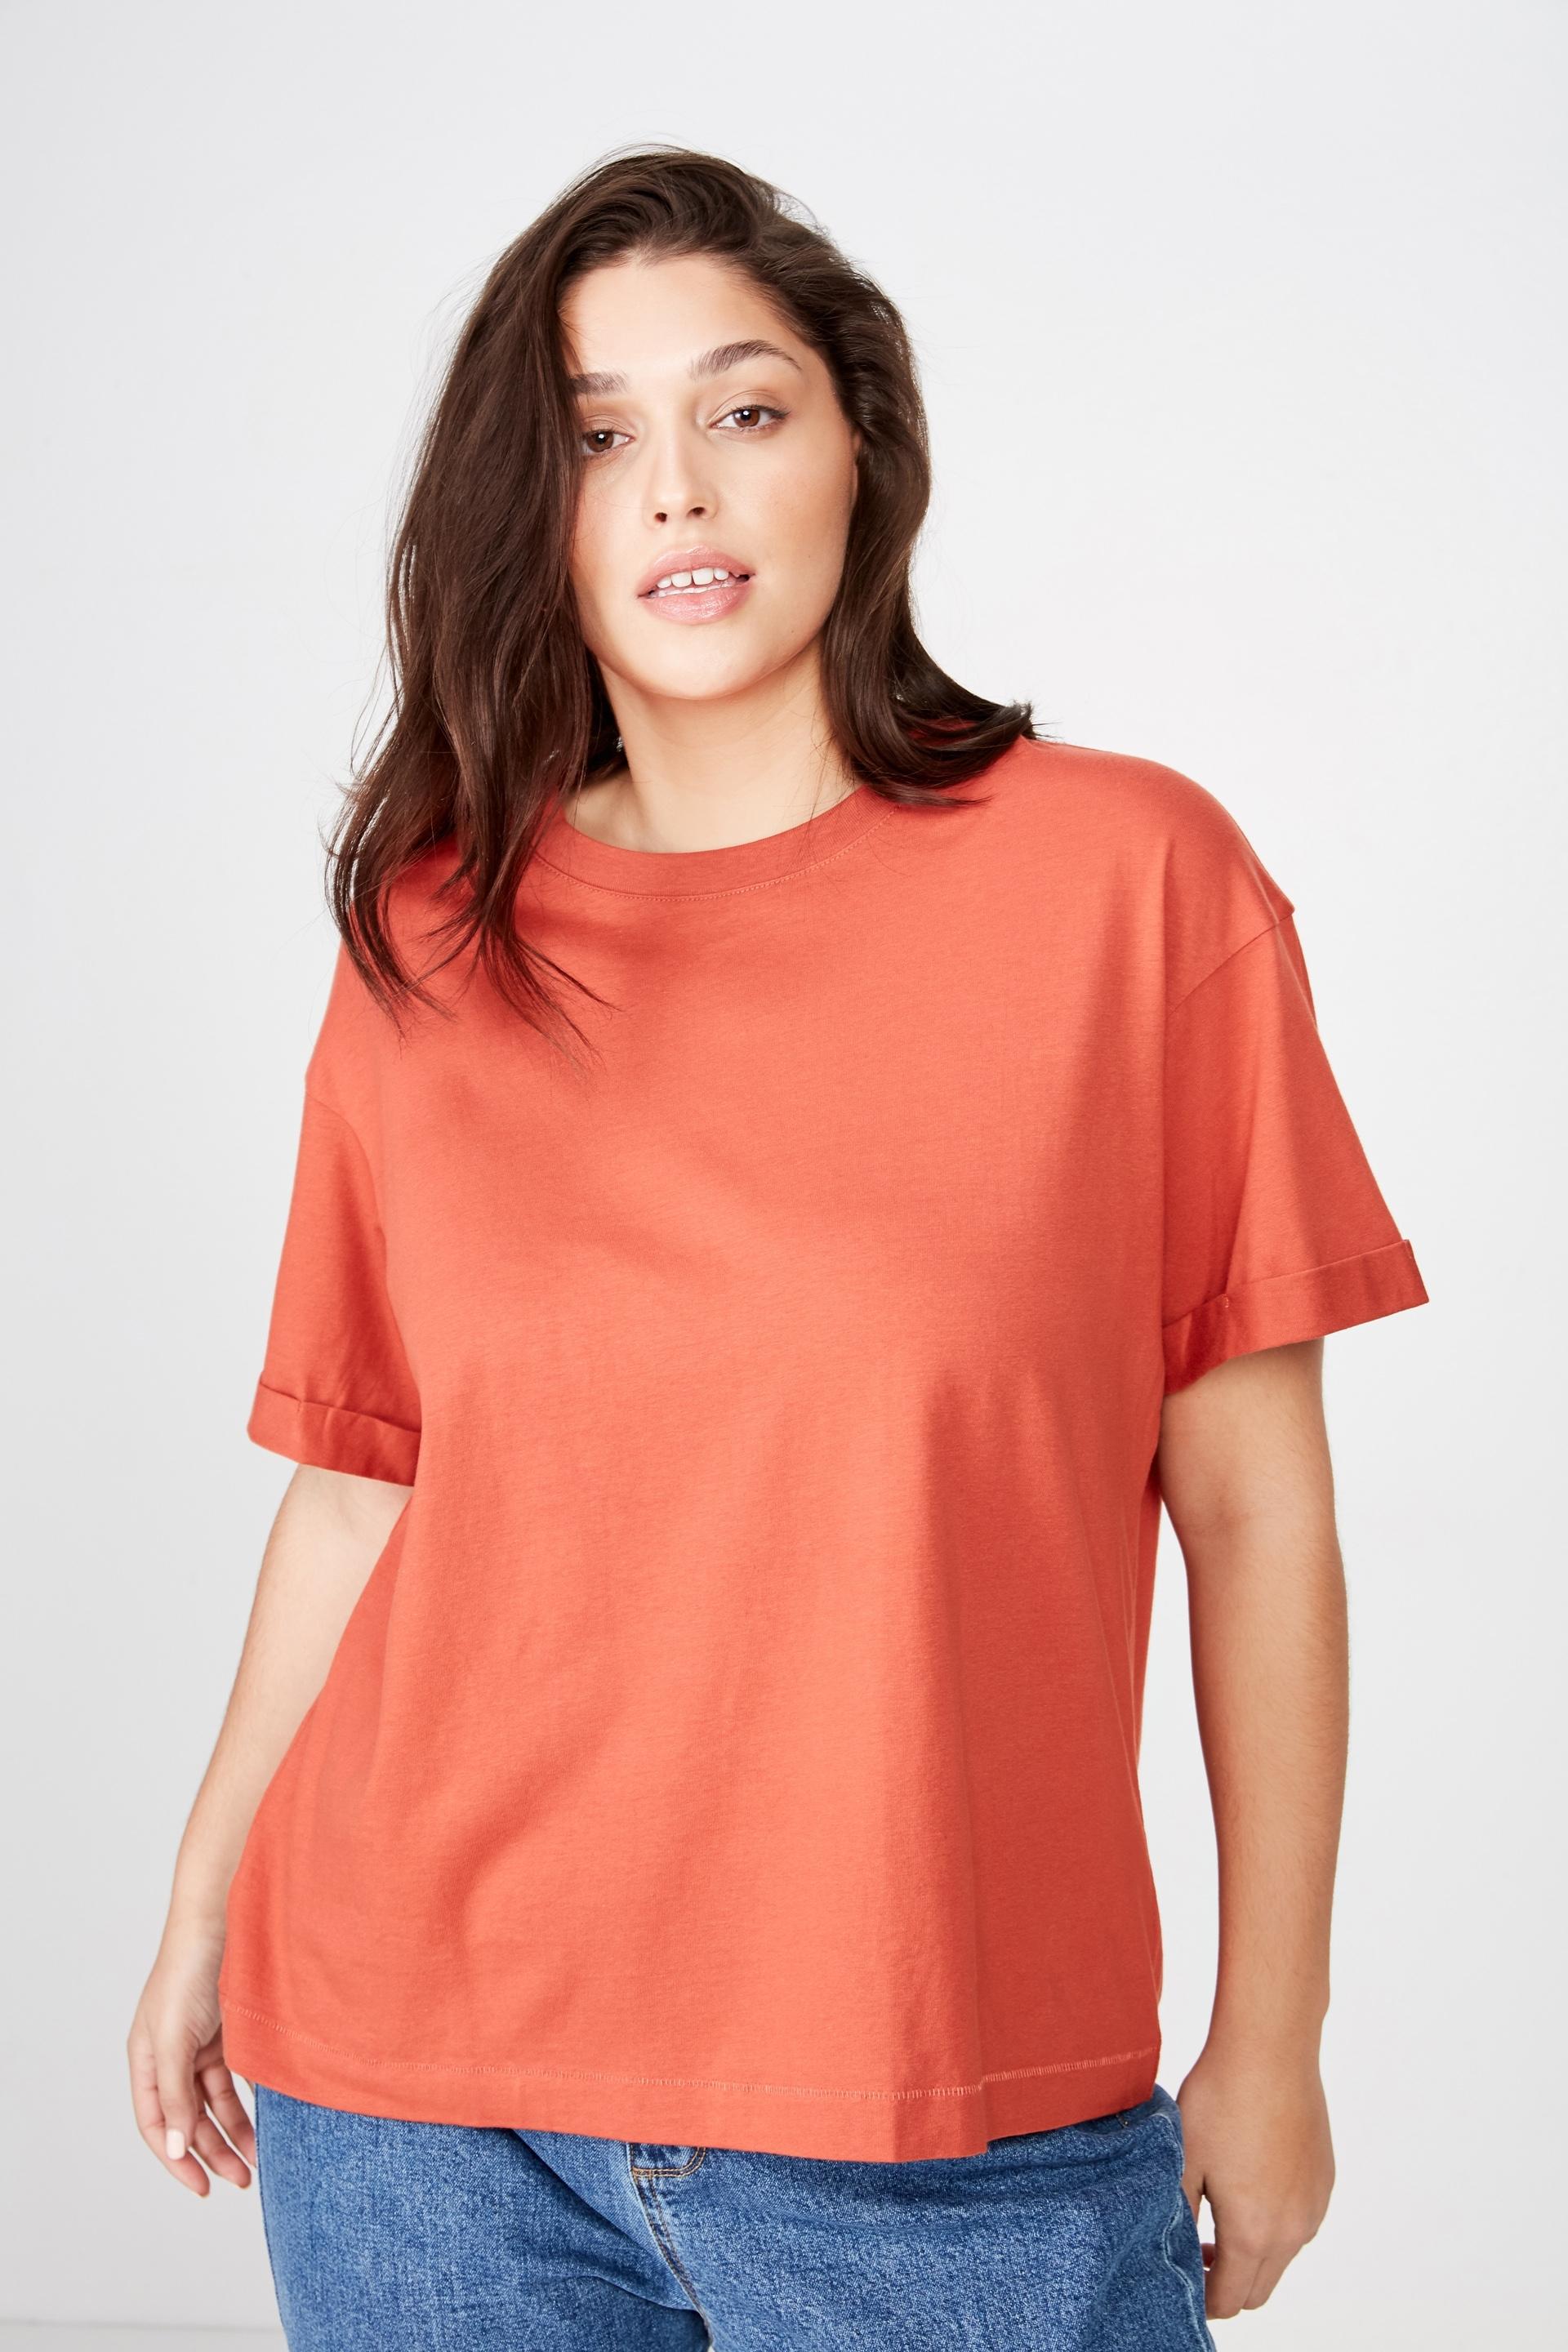 Curve relaxed boyfriend tee - rustic red Cotton On Tops | Superbalist.com